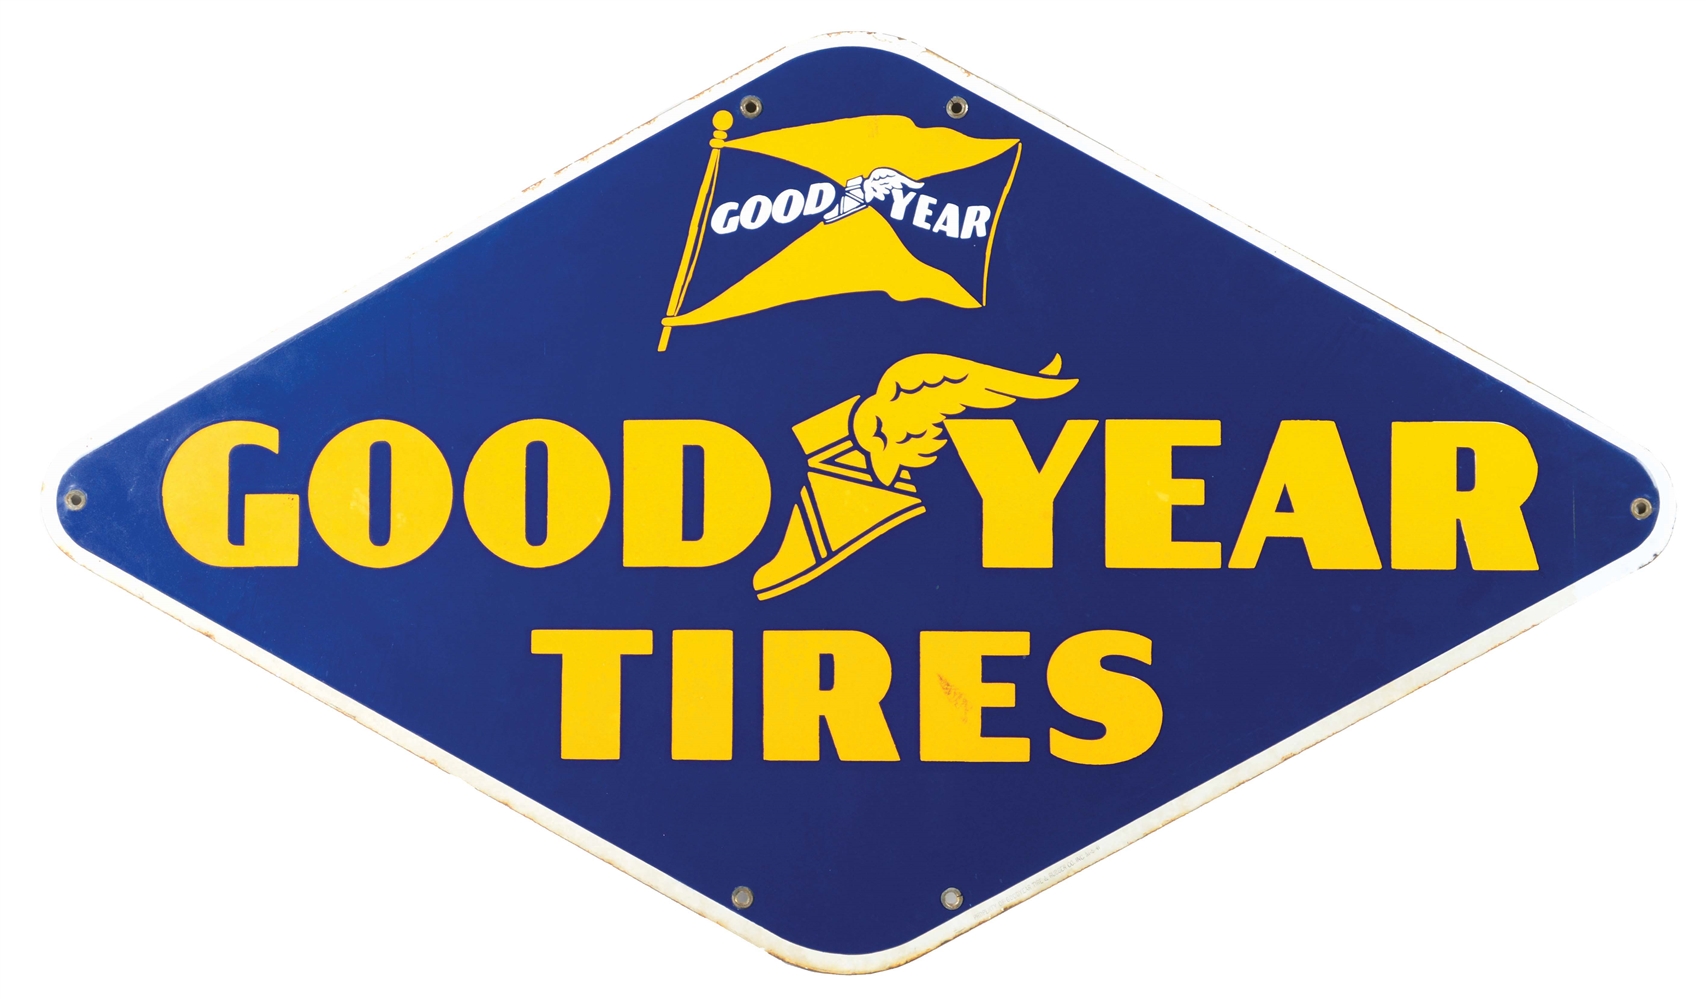 GOODYEAR TIRES PORCELAIN SERVICE STATION SIGN W/ WINGED FOOT GRAPHIC. 